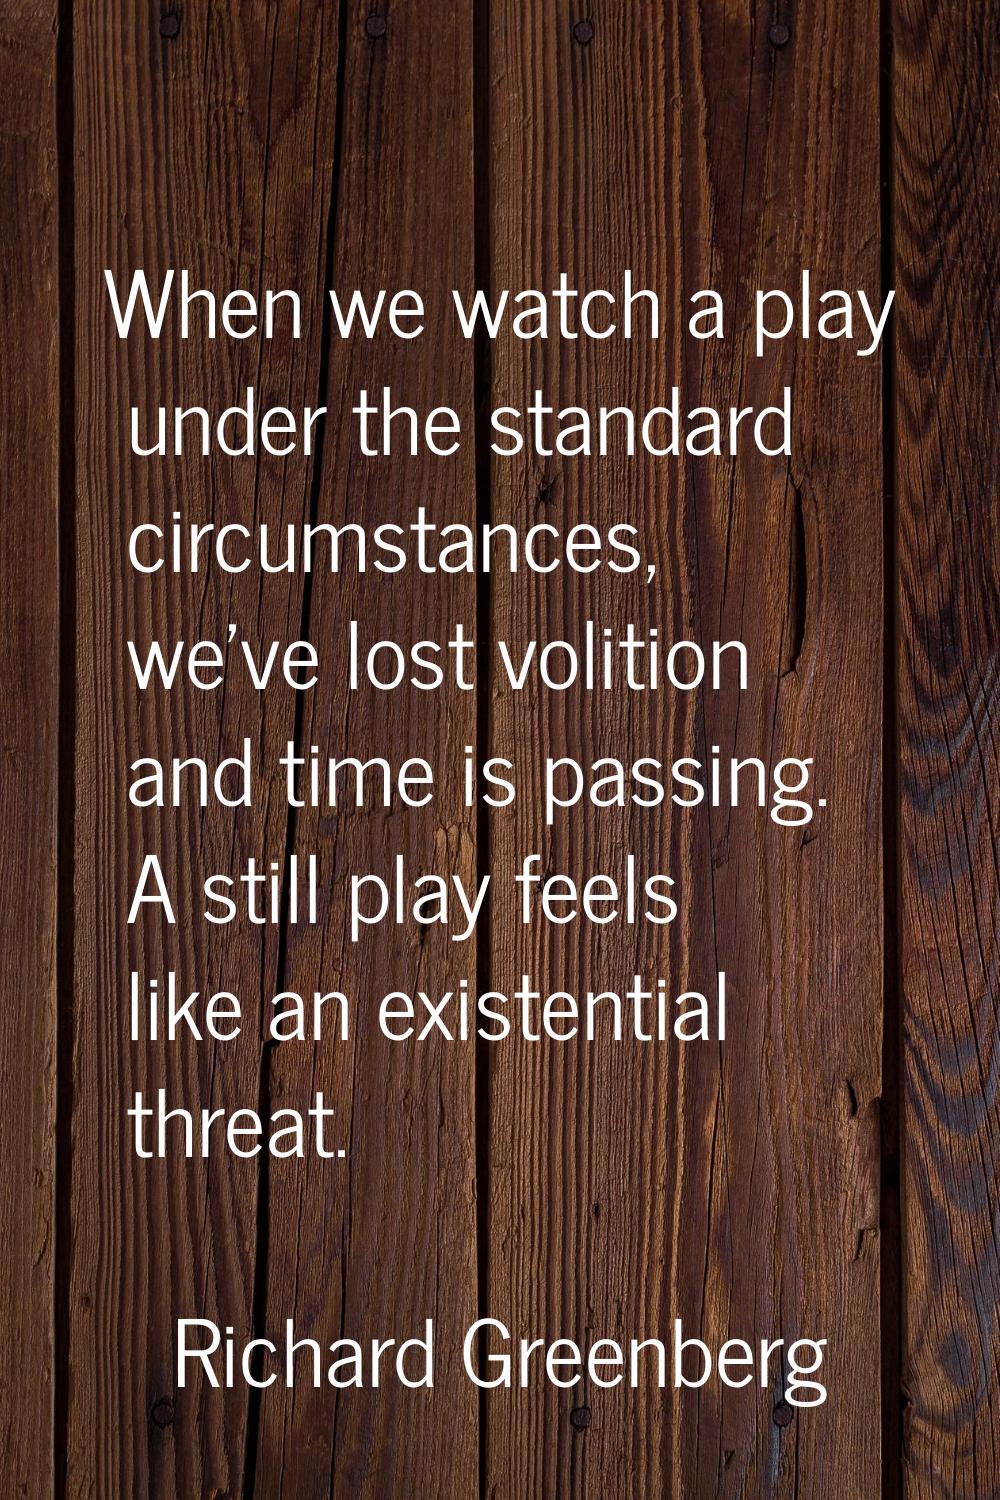 When we watch a play under the standard circumstances, we've lost volition and time is passing. A s